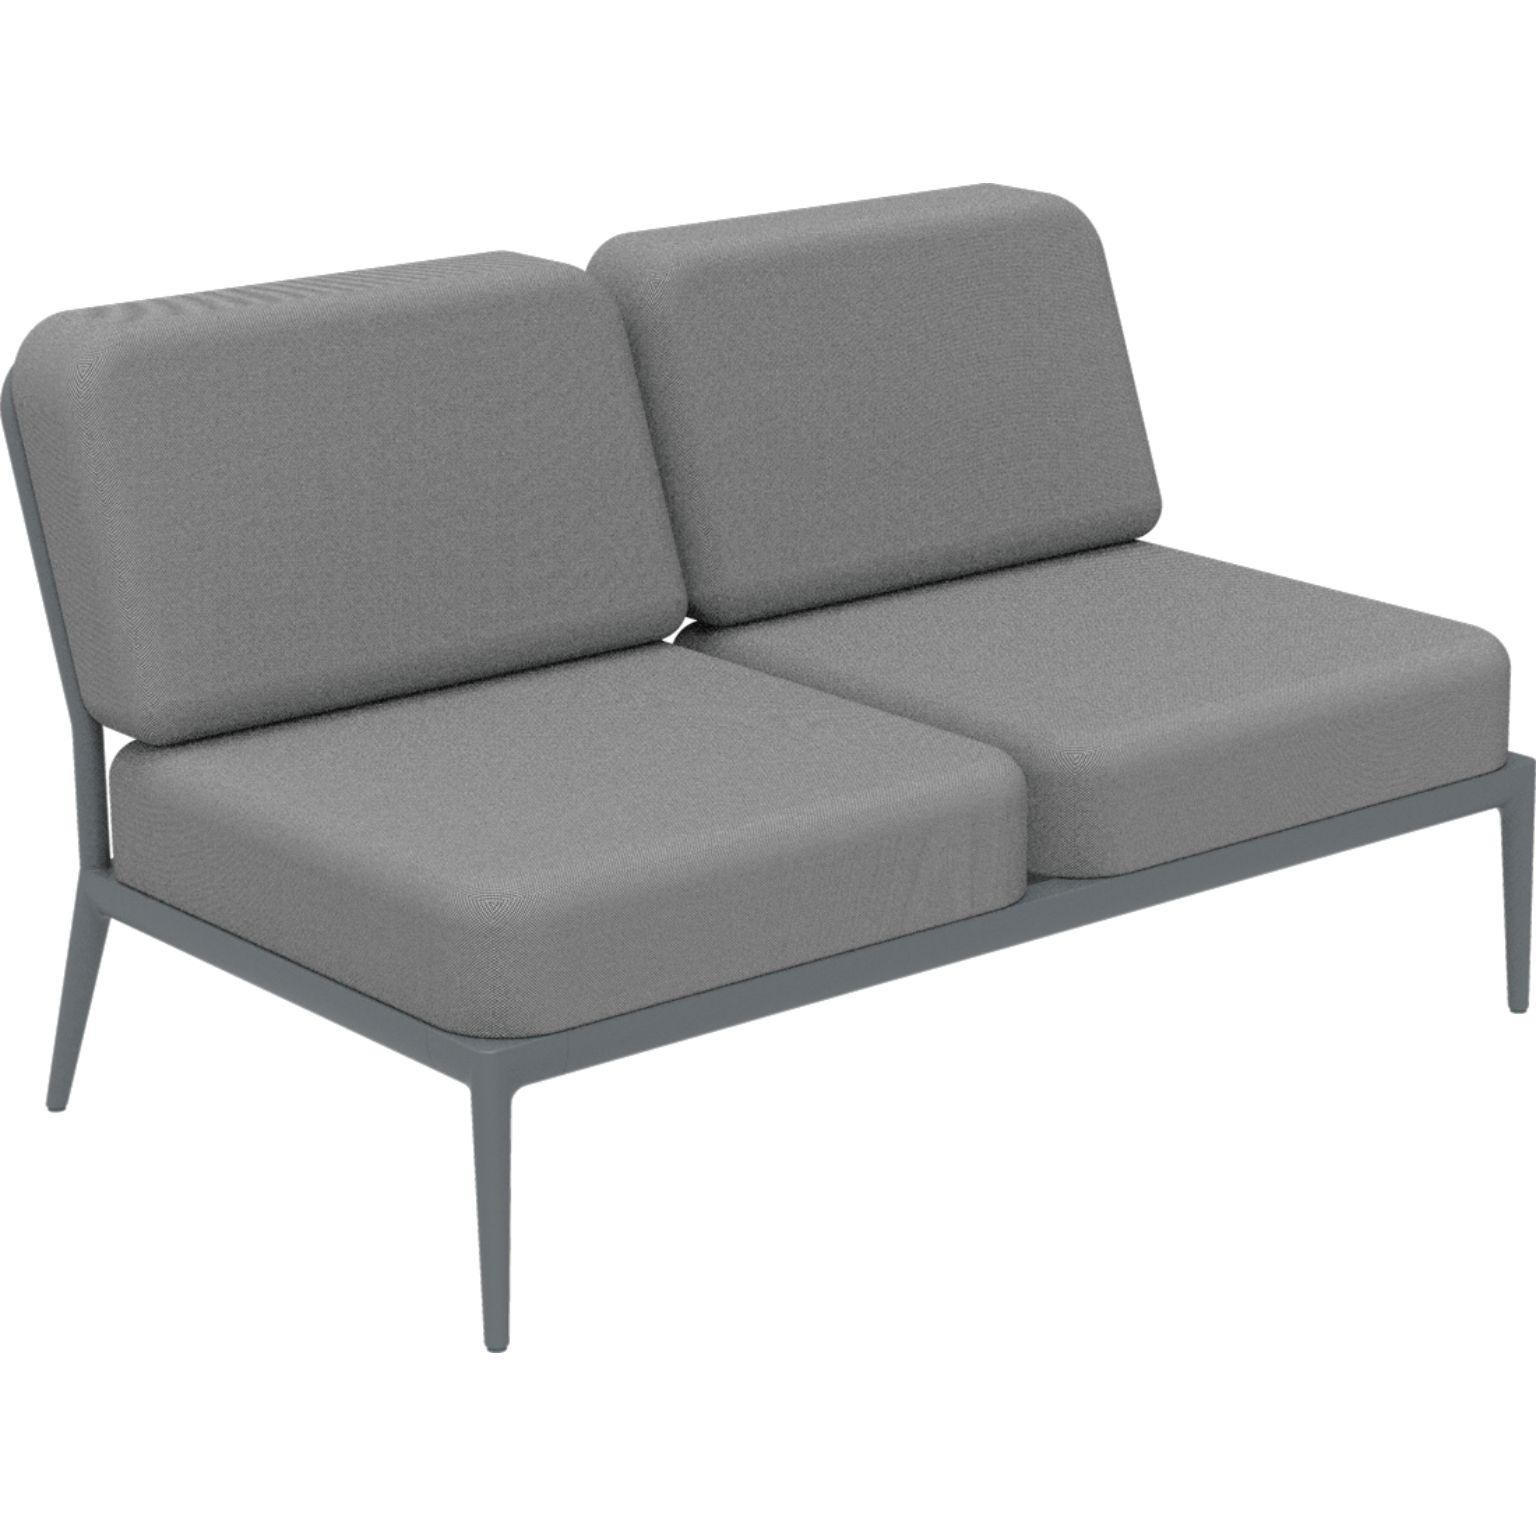 Nature grey double central modular sofa by MOWEE
Dimensions: D83 x W136 x H81 cm (seat height 42 cm).
Material: Aluminum and upholstery.
Weight: 27 kg.
Also available in different colors and finishes.

An unmistakable collection for its beauty